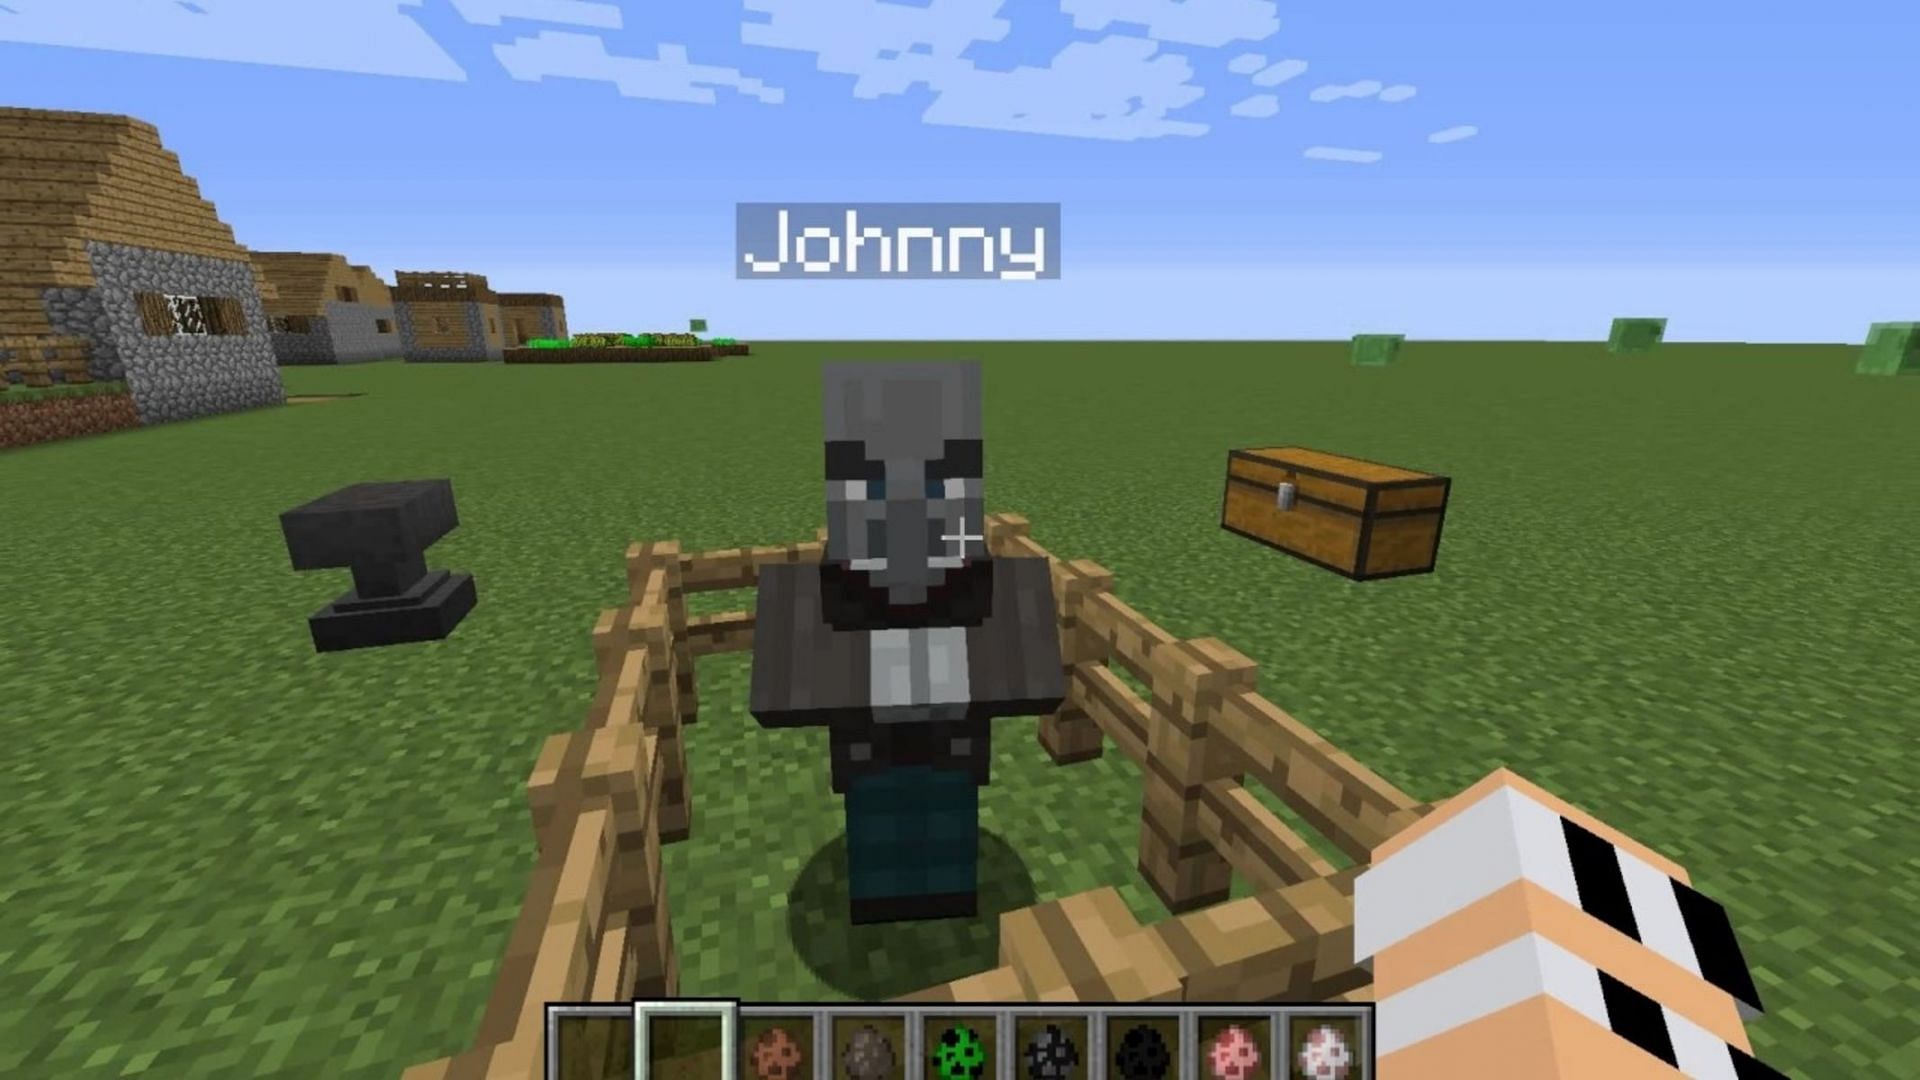 One particular Easter Egg in Minecraft pays homage to a Stephen King novel and Stanley Kubrick film (Image via Mojang)